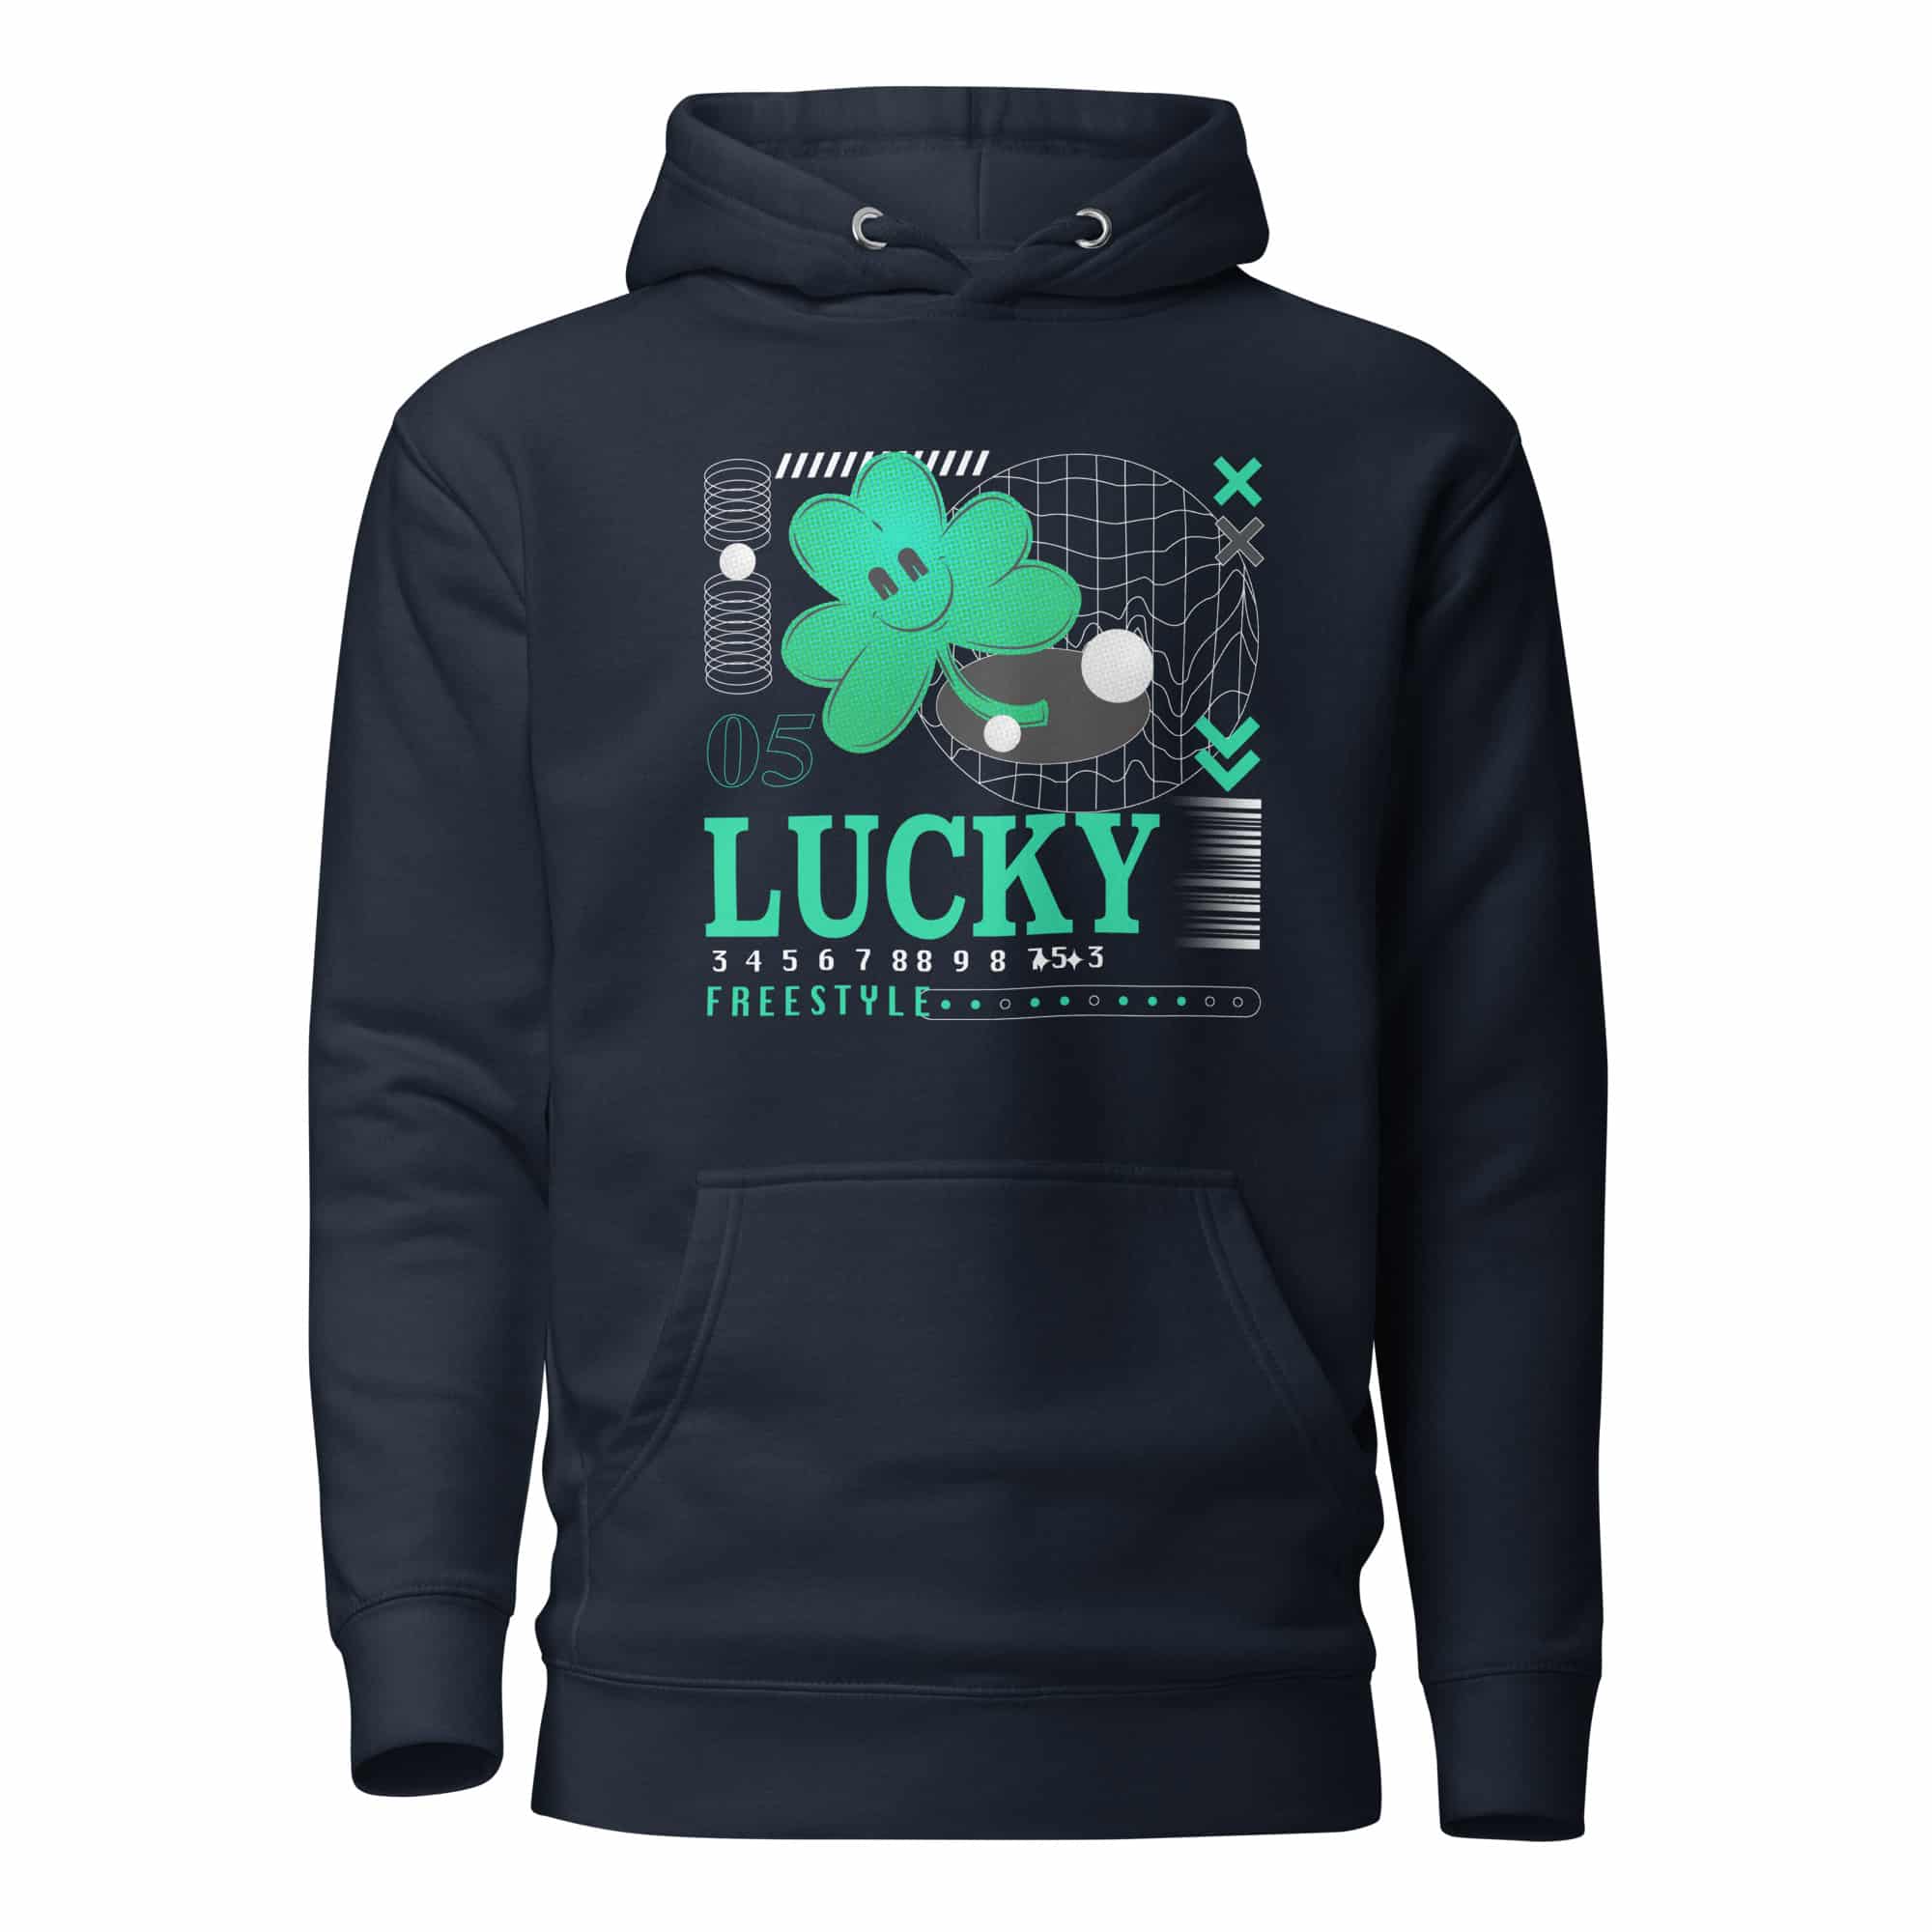 Lucky Unisex Hoodie Men's graphic t-shirts Men's designer shirts Premium sweatshirts Unisex hoodies Premium hooded sweatshirts Designer sweatshirts High-quality sweatshirts Luxury sweatshirts Unisex fleece sweatshirts Premium pullover sweatshirts Unisex heavyweight sweatshirts Premium cotton sweatshirts Video game store Gaming merchandise Gaming accessories shop Online gaming store Video game shop near me Gaming console store PC gaming store Gaming gear shop Retro gaming shop Board game shop Anime merchandise Anime store online Japanese anime shop Anime figurines Manga shop Anime DVDs Anime accessories Anime apparel Anime collectibles Anime gifts